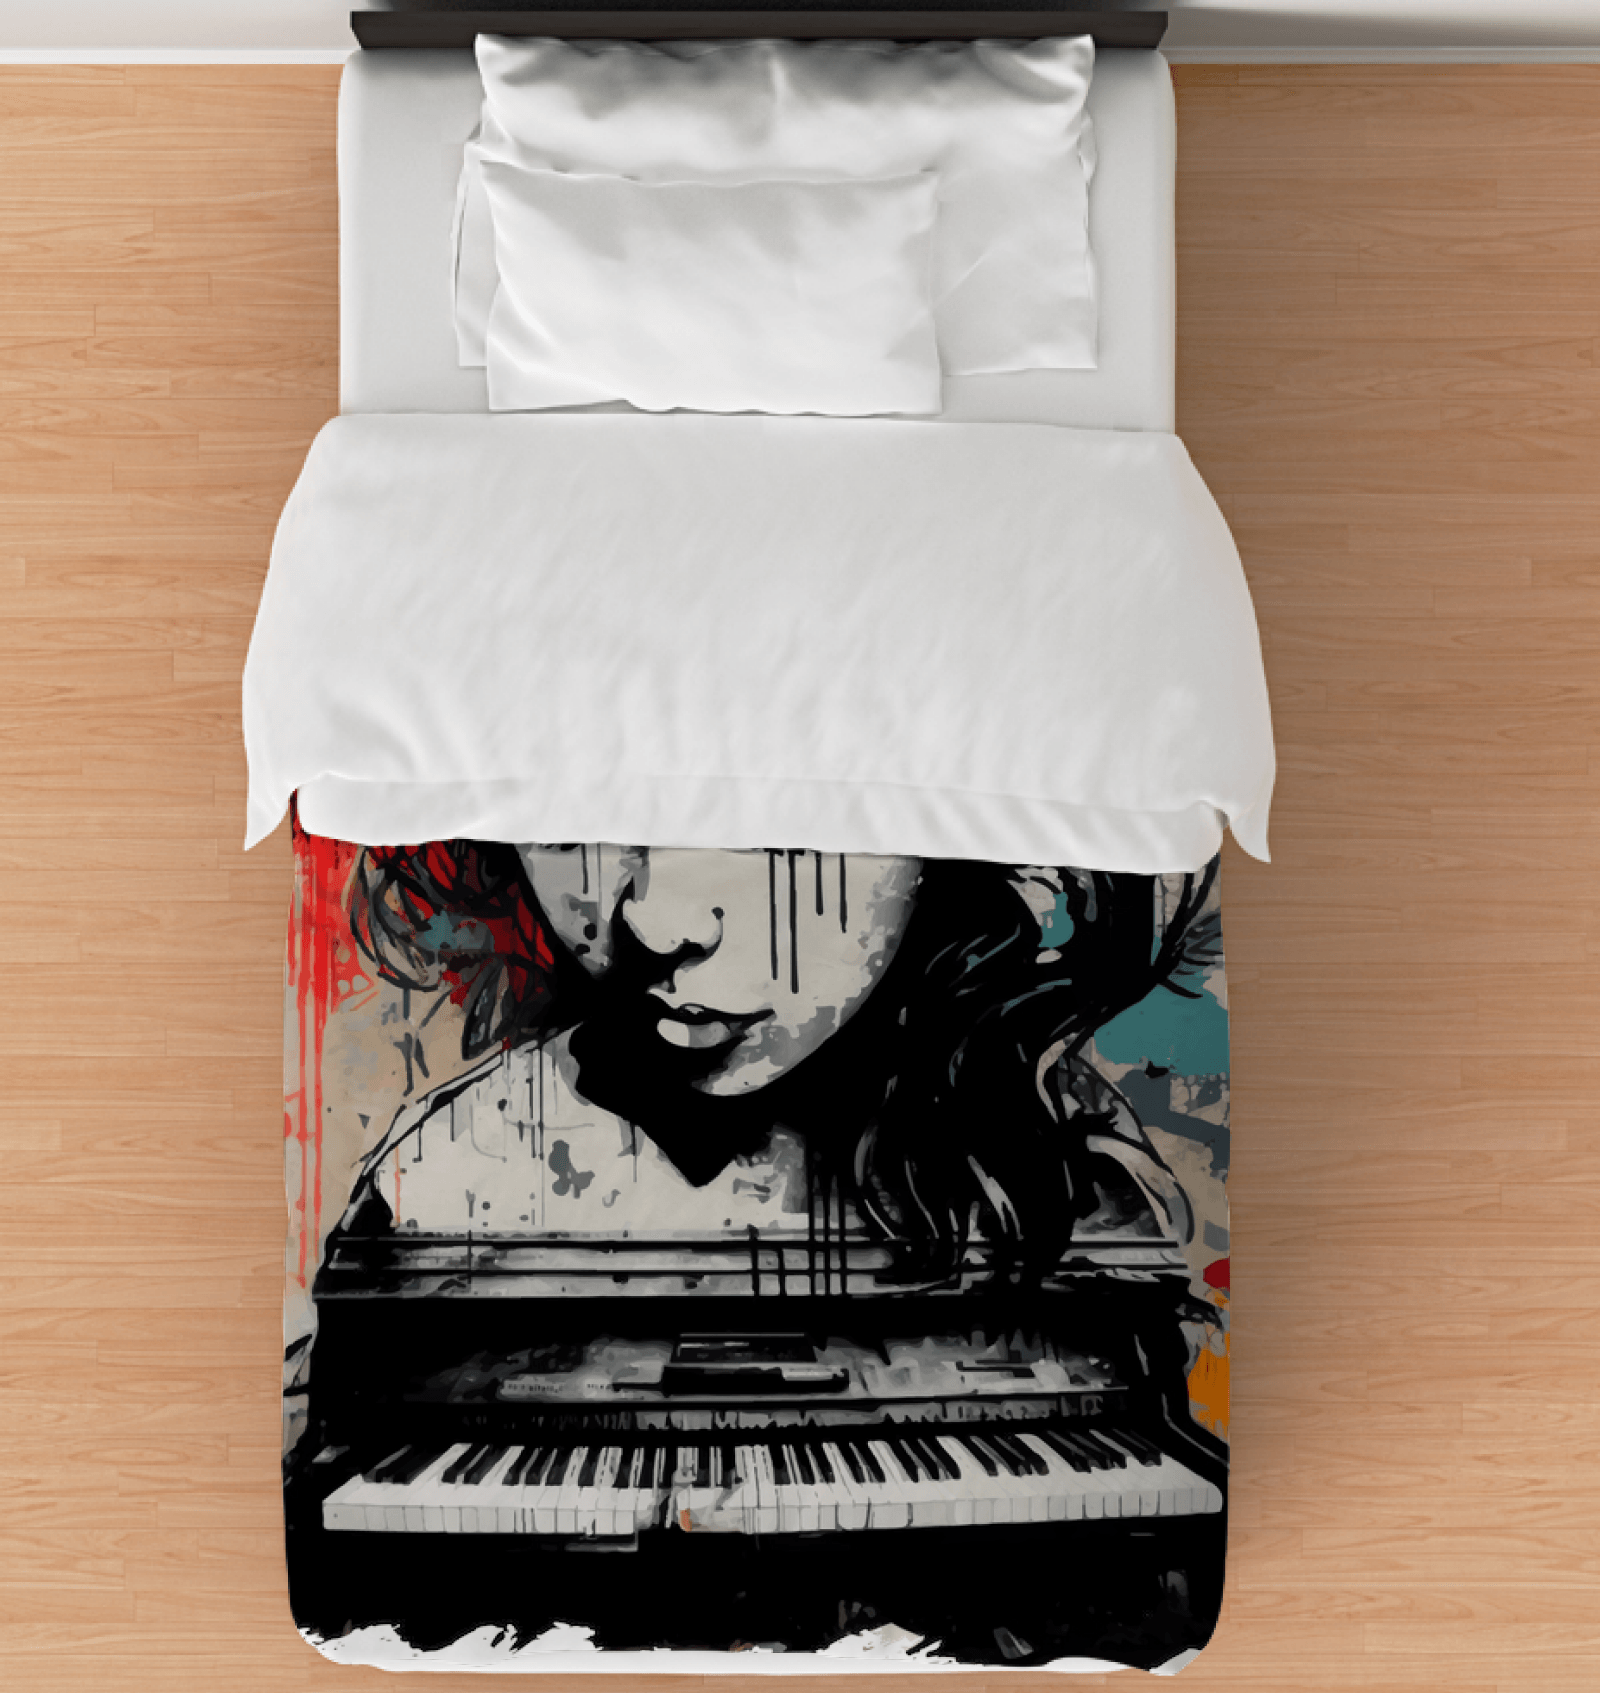 Her Fingers Sing Stories Duvet Cover - Beyond T-shirts